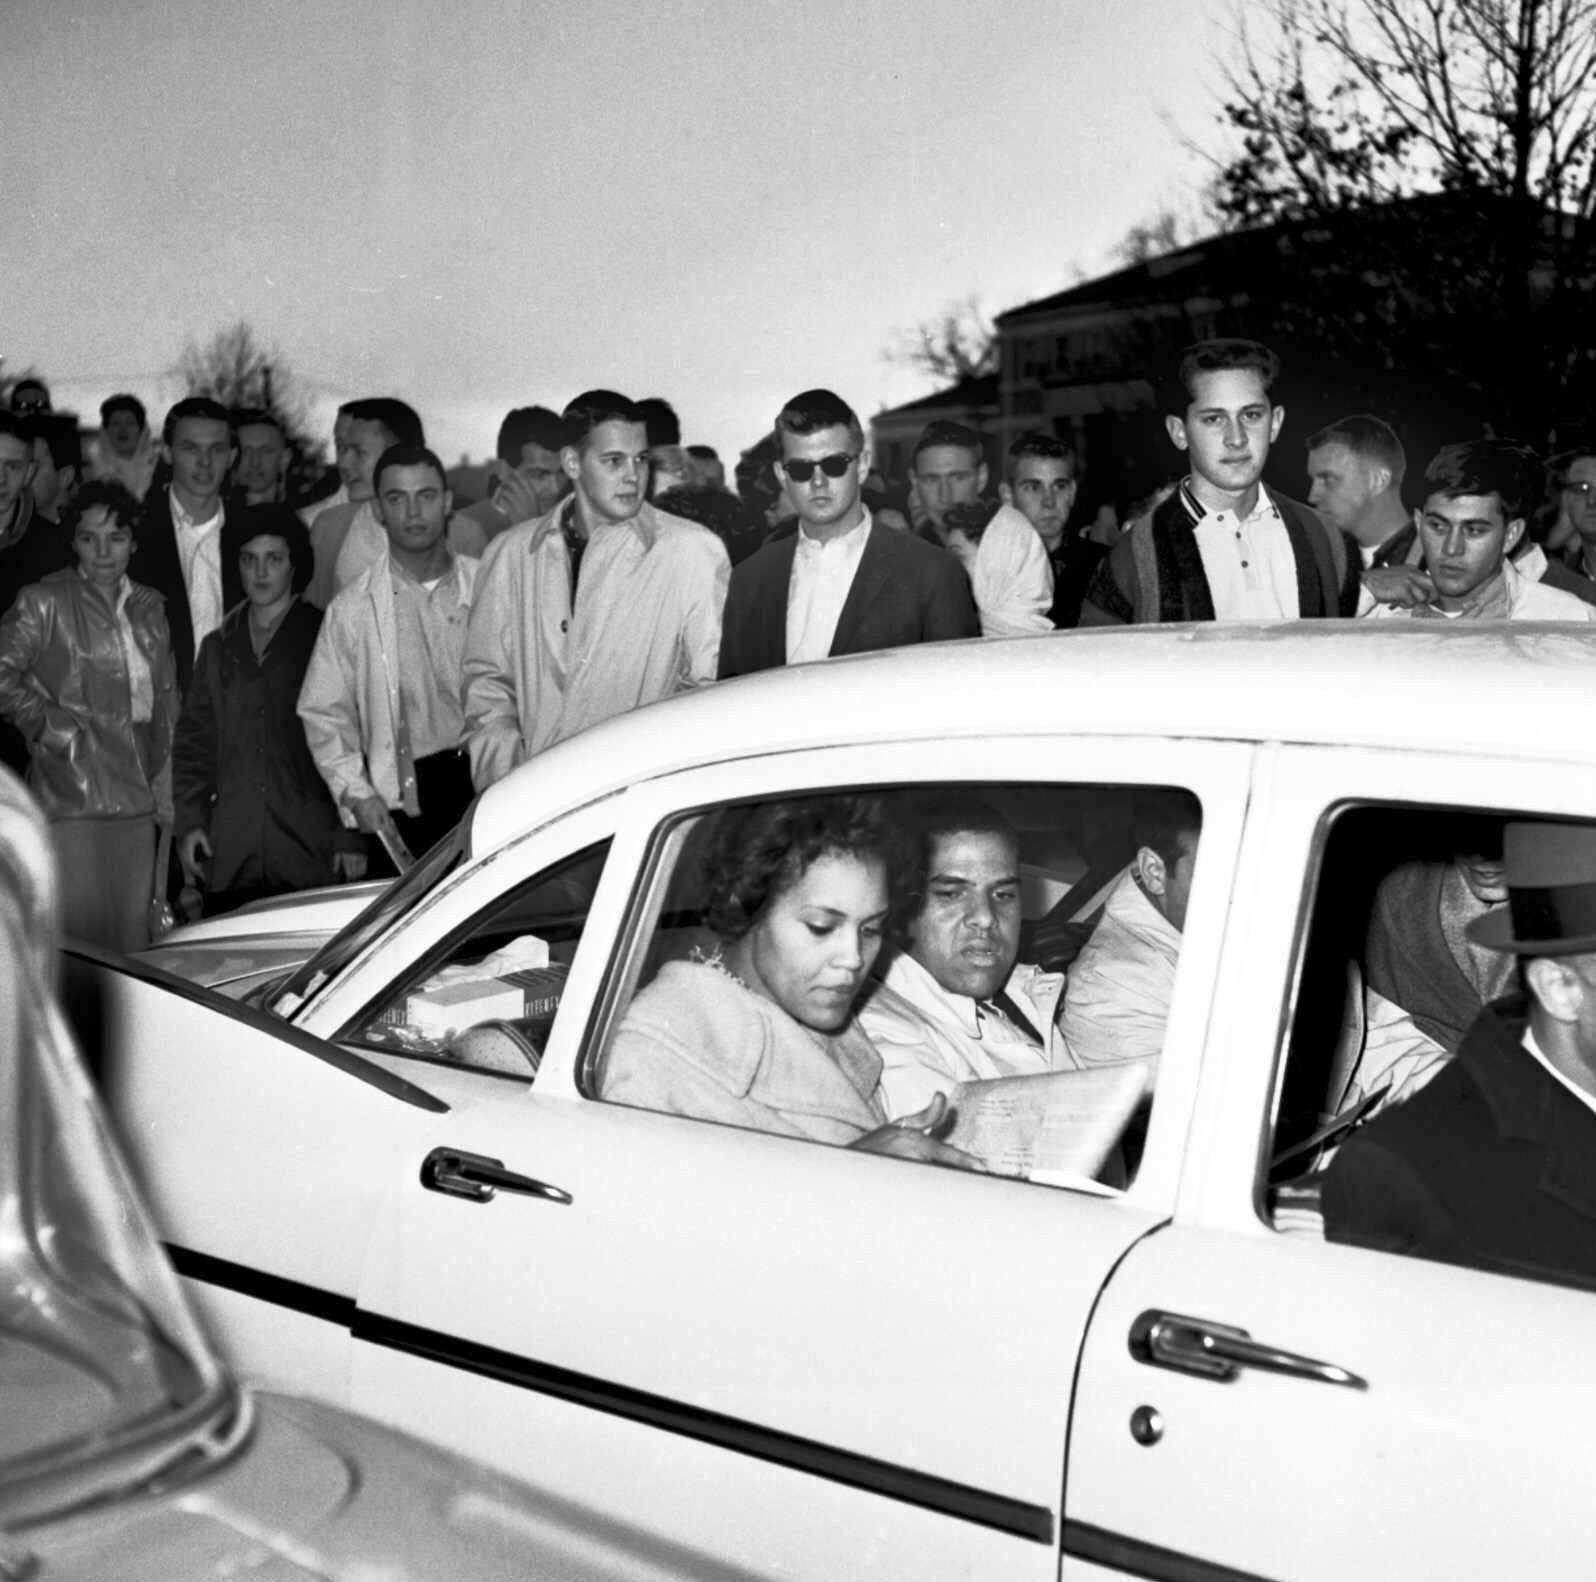 University of Georgia students shout and jeer in this 1961 photo at Charlayne Hunter, 18, left, and Hamilton Holmes, 19, as they leave the administration building after completing registration at Athens, Ga.